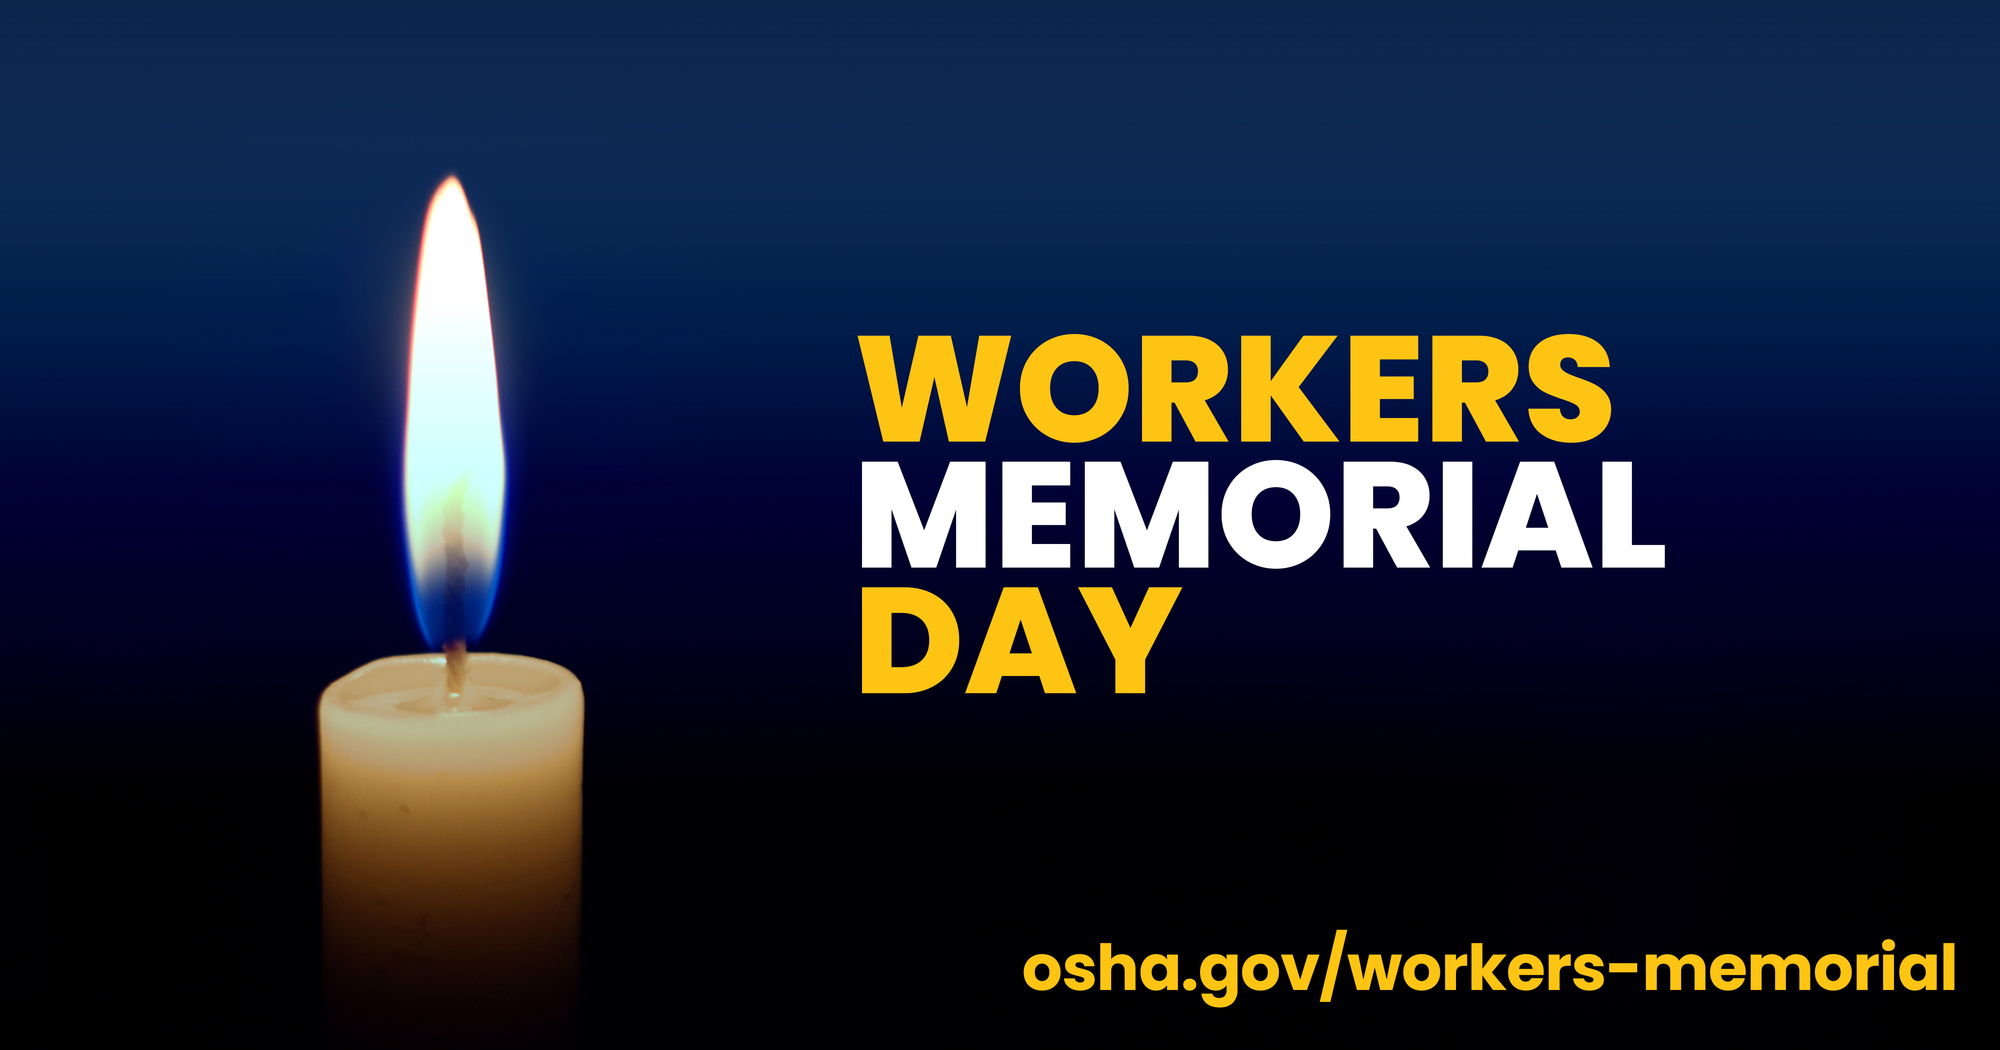 Lit candle on a dark blue to black gradient background. Text reading: Workers Memorial Day - osha.gov/workers-memorial